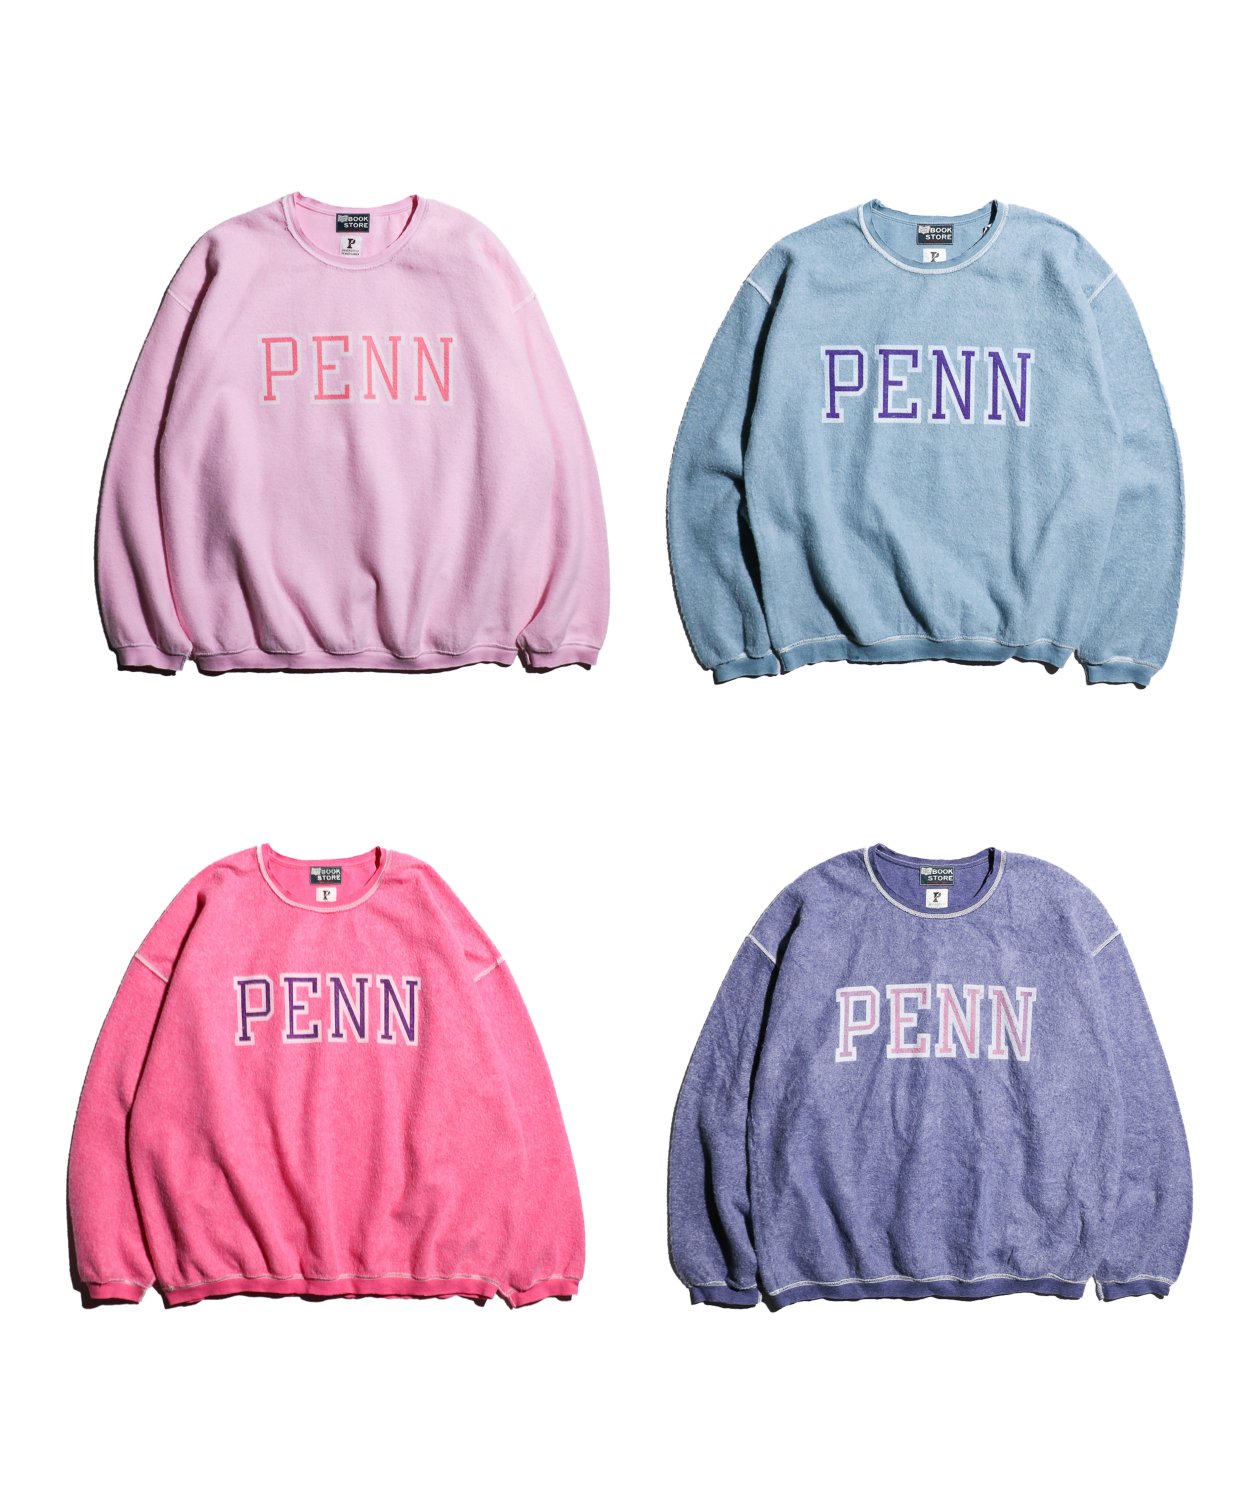 The BOOK STORE / IVY LEAGUE OTHER SIDE PRINTED PENN SWEAT